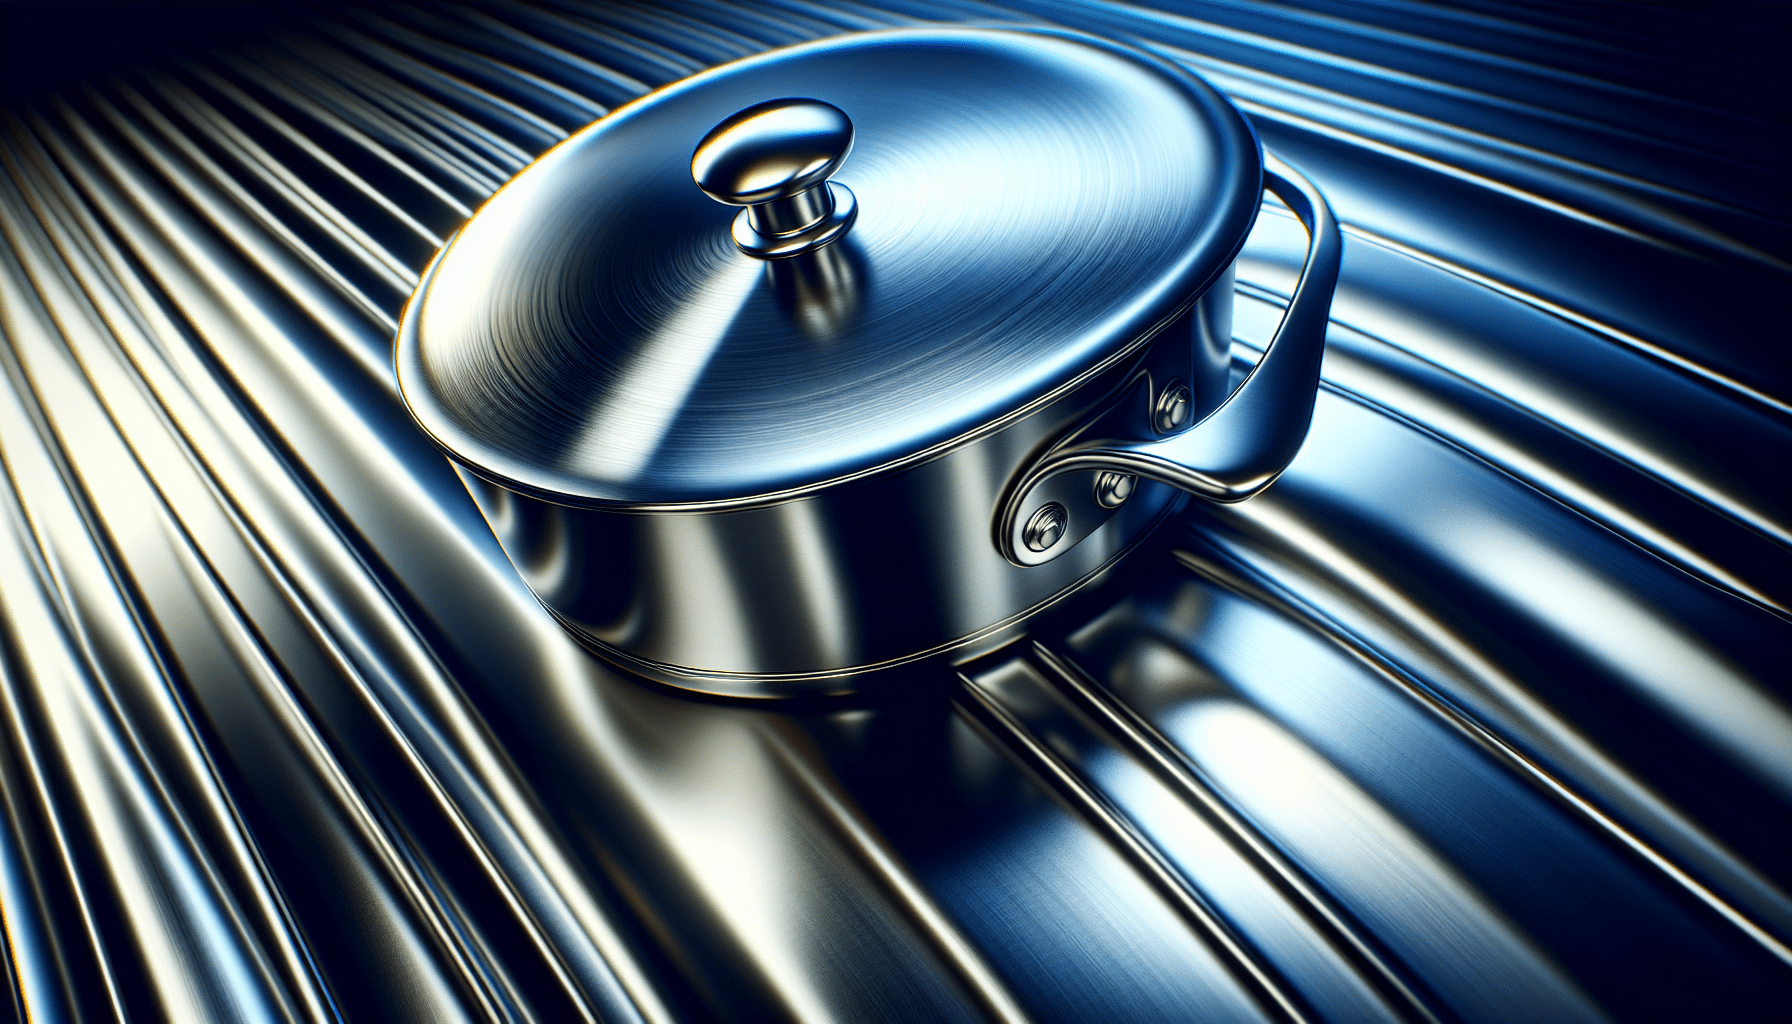 What Is The Best Material To Cook With Pots And Pans?